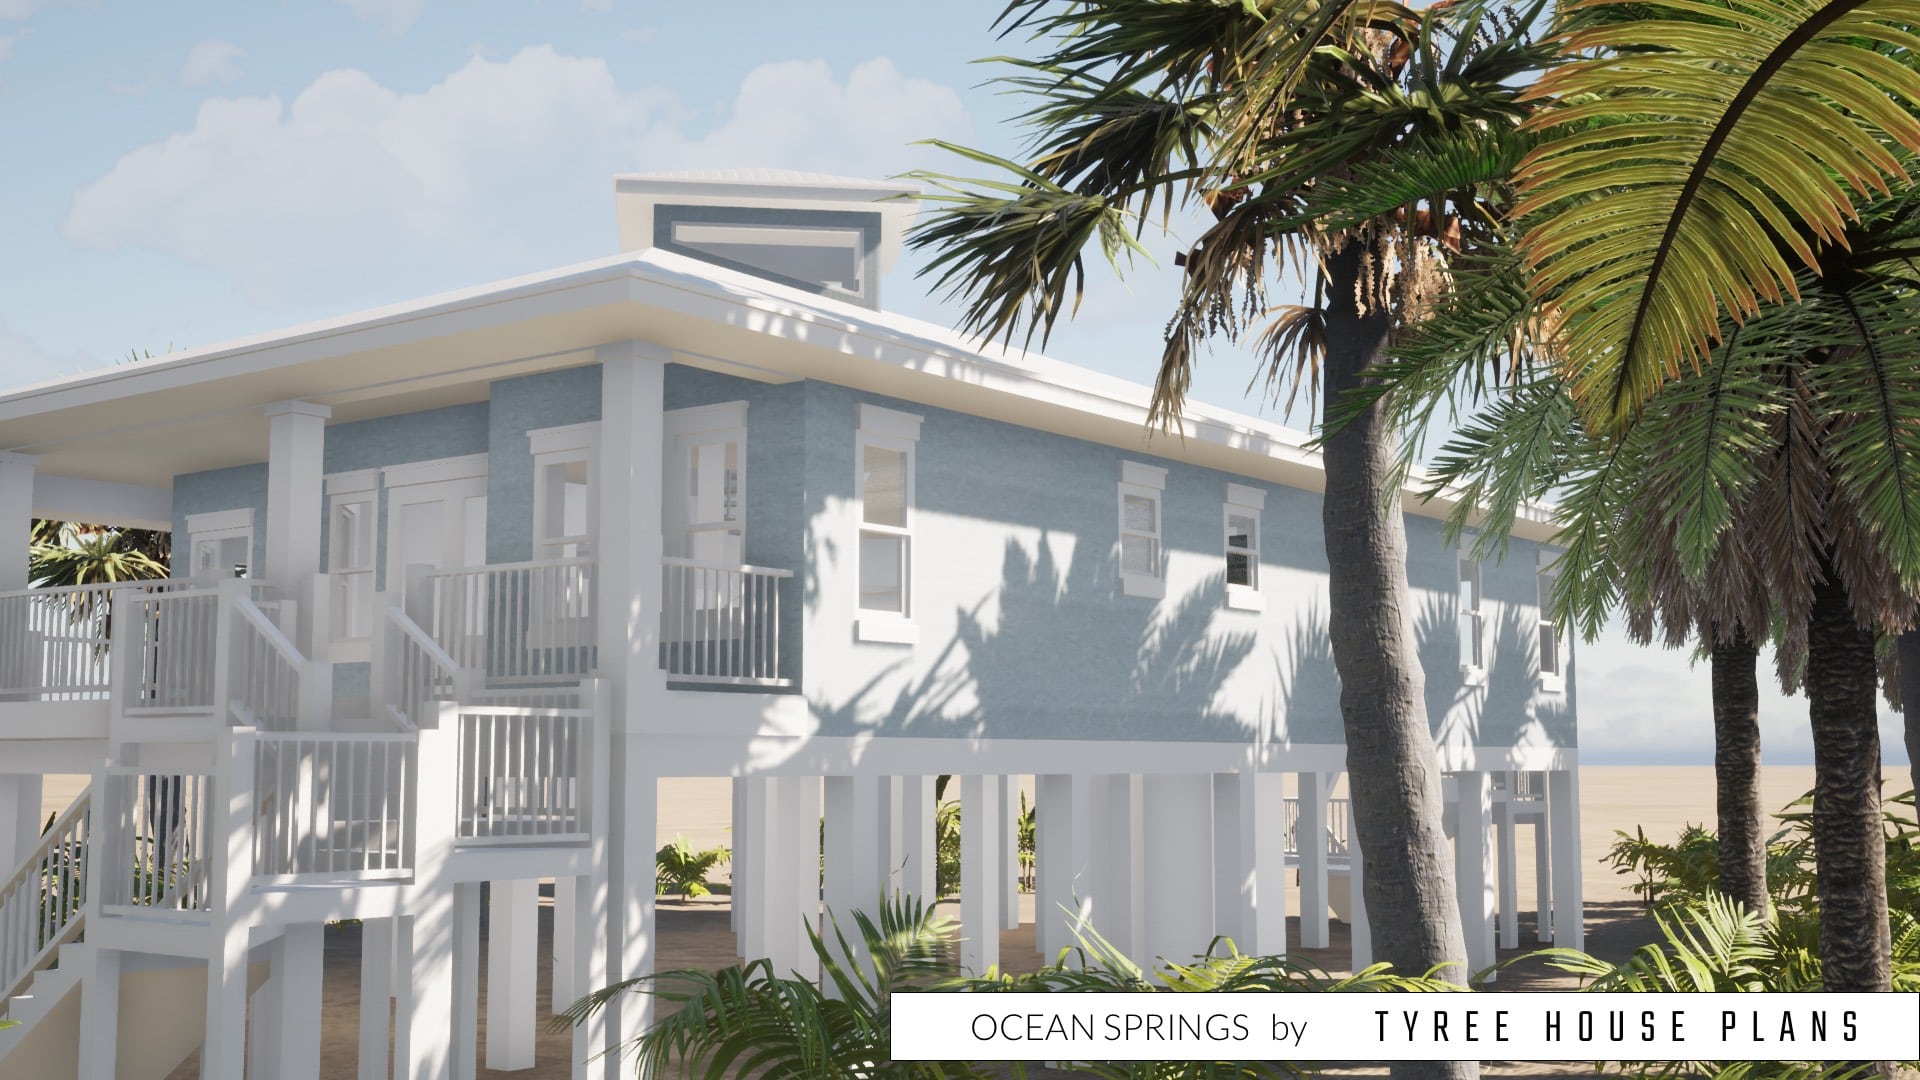 Side view with tower above. Ocean Springs by Tyree House Plans.